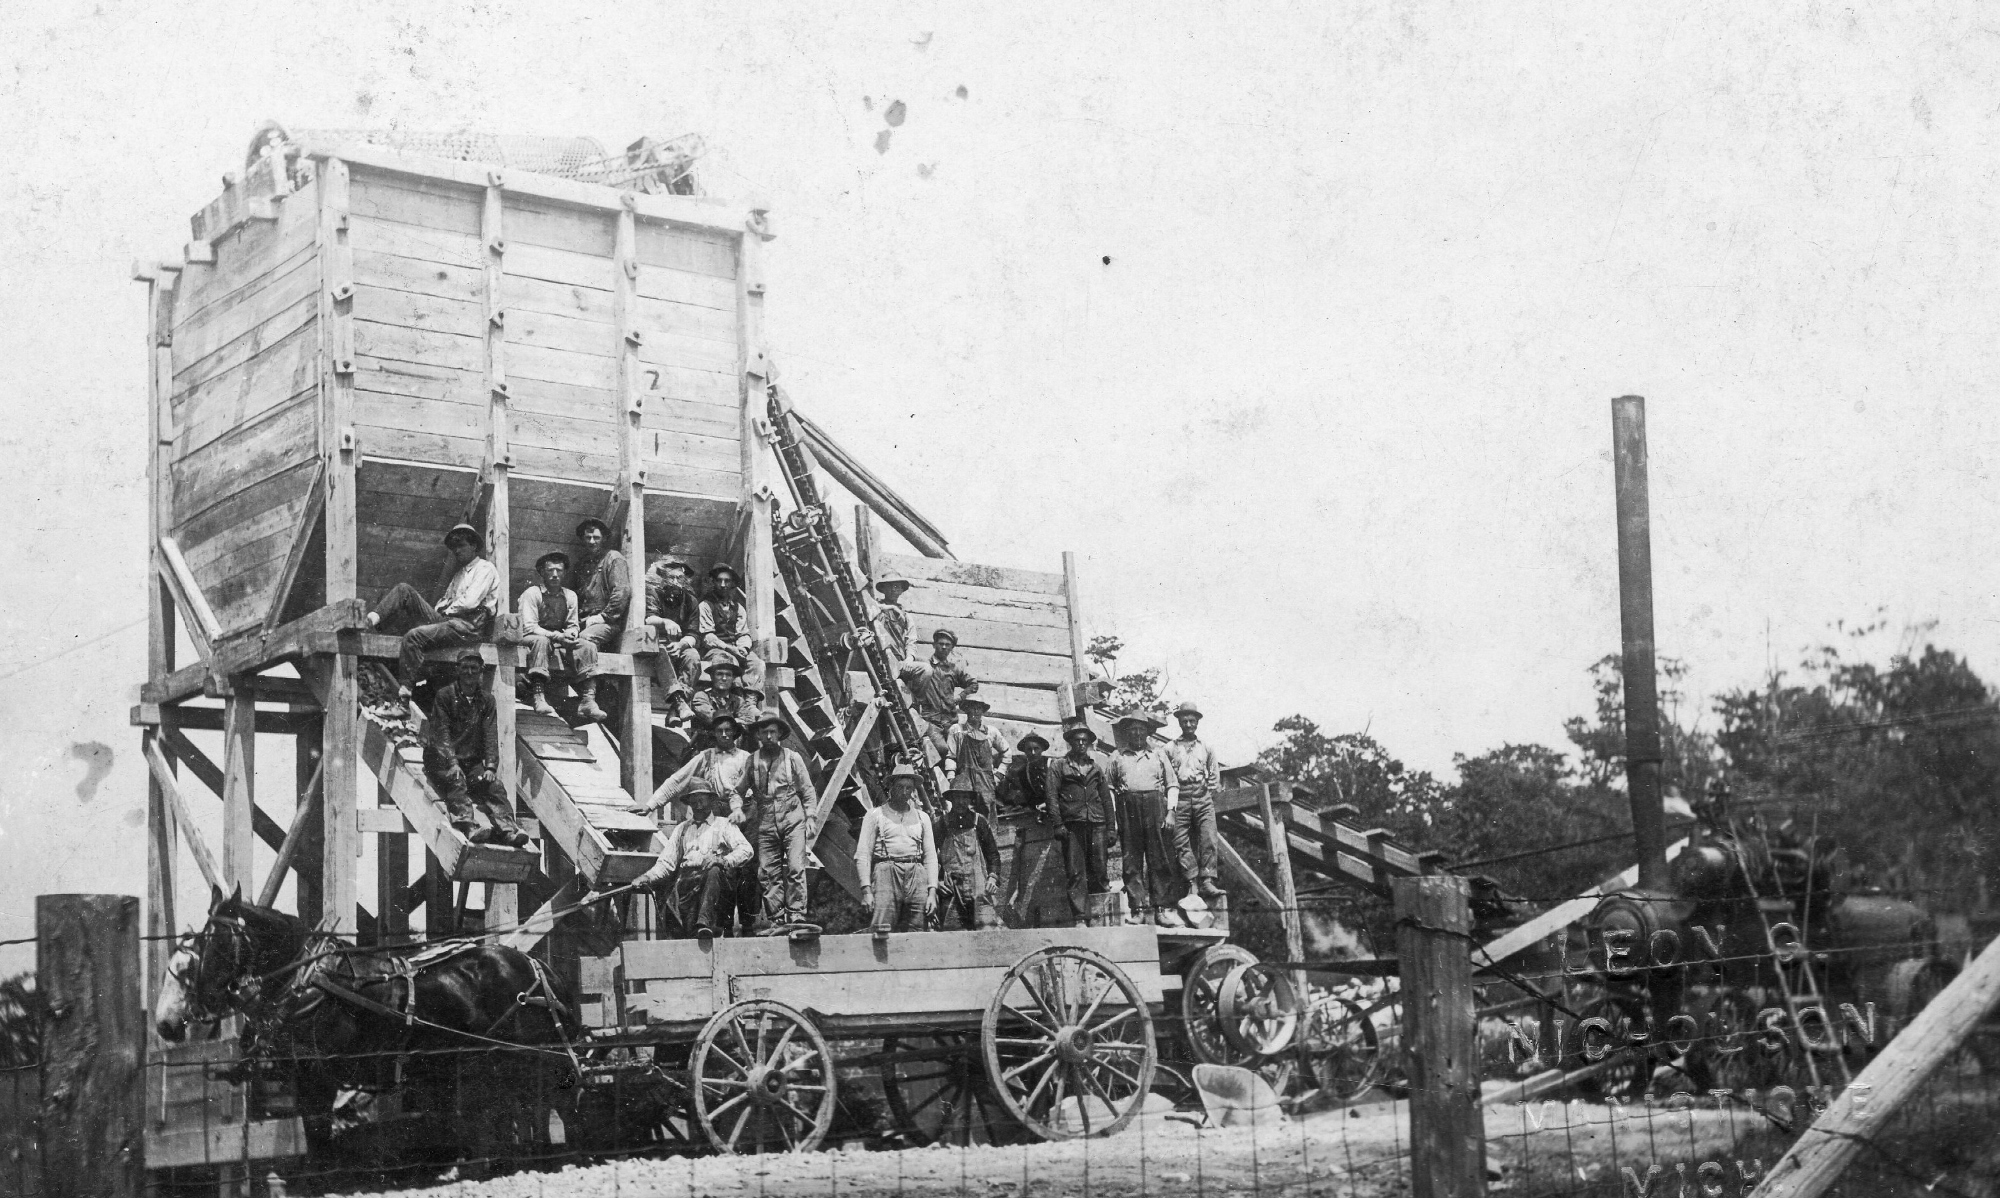 Circa 1902 photo of employees of the White Marble Lime Company and a stone crusher at one of the company’s quarry and lime kiln operations (Leon Nicholson Collection).